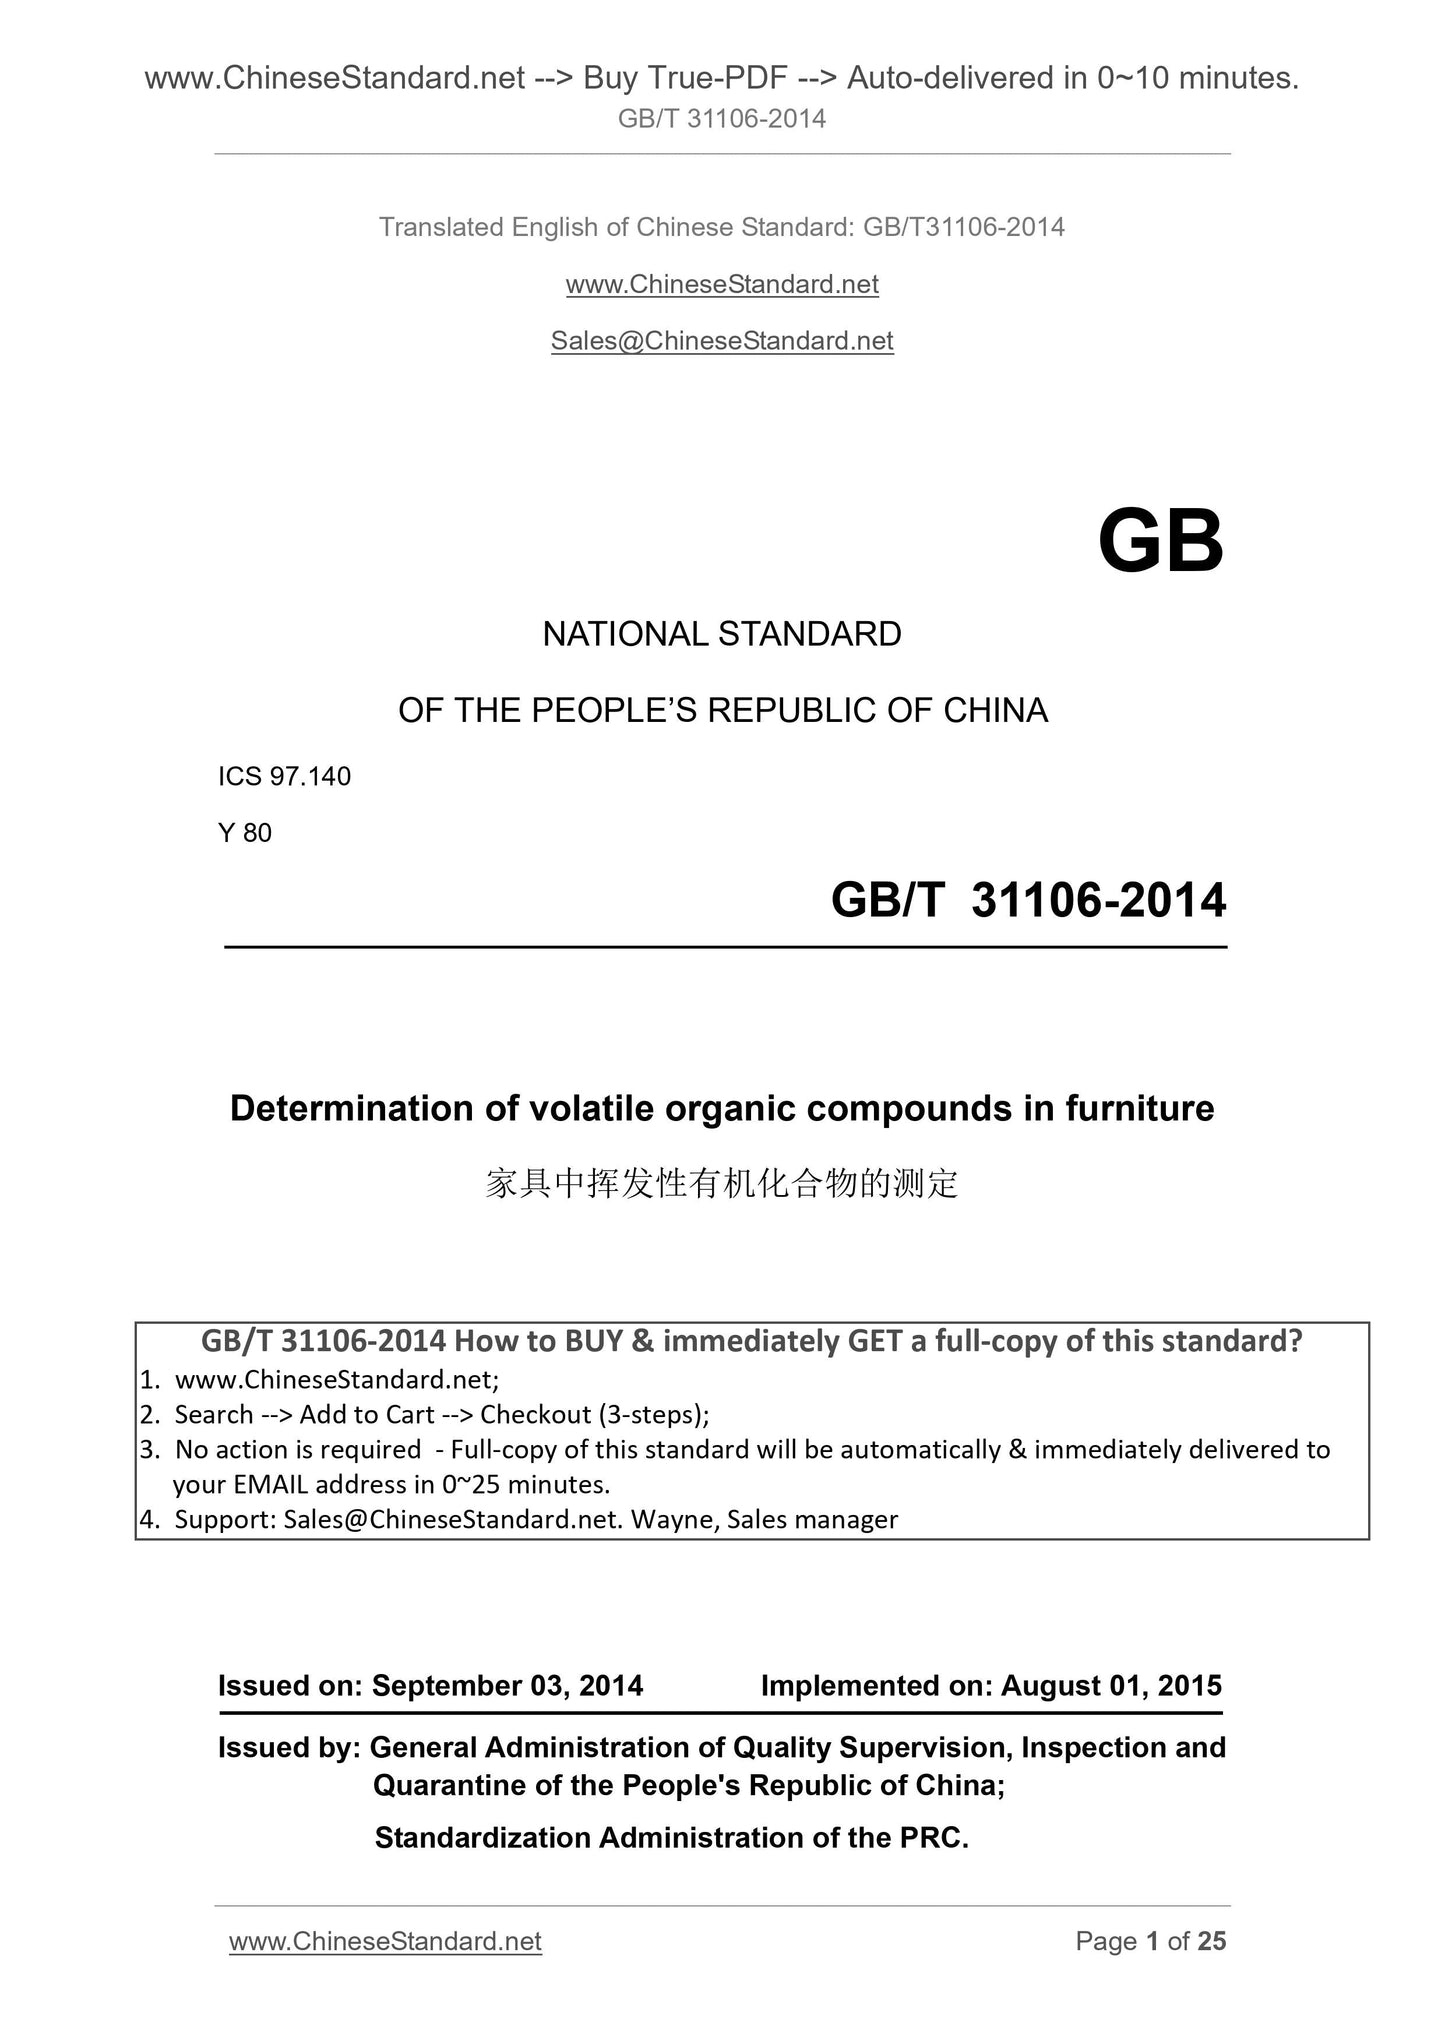 GB/T 31106-2014 Page 1